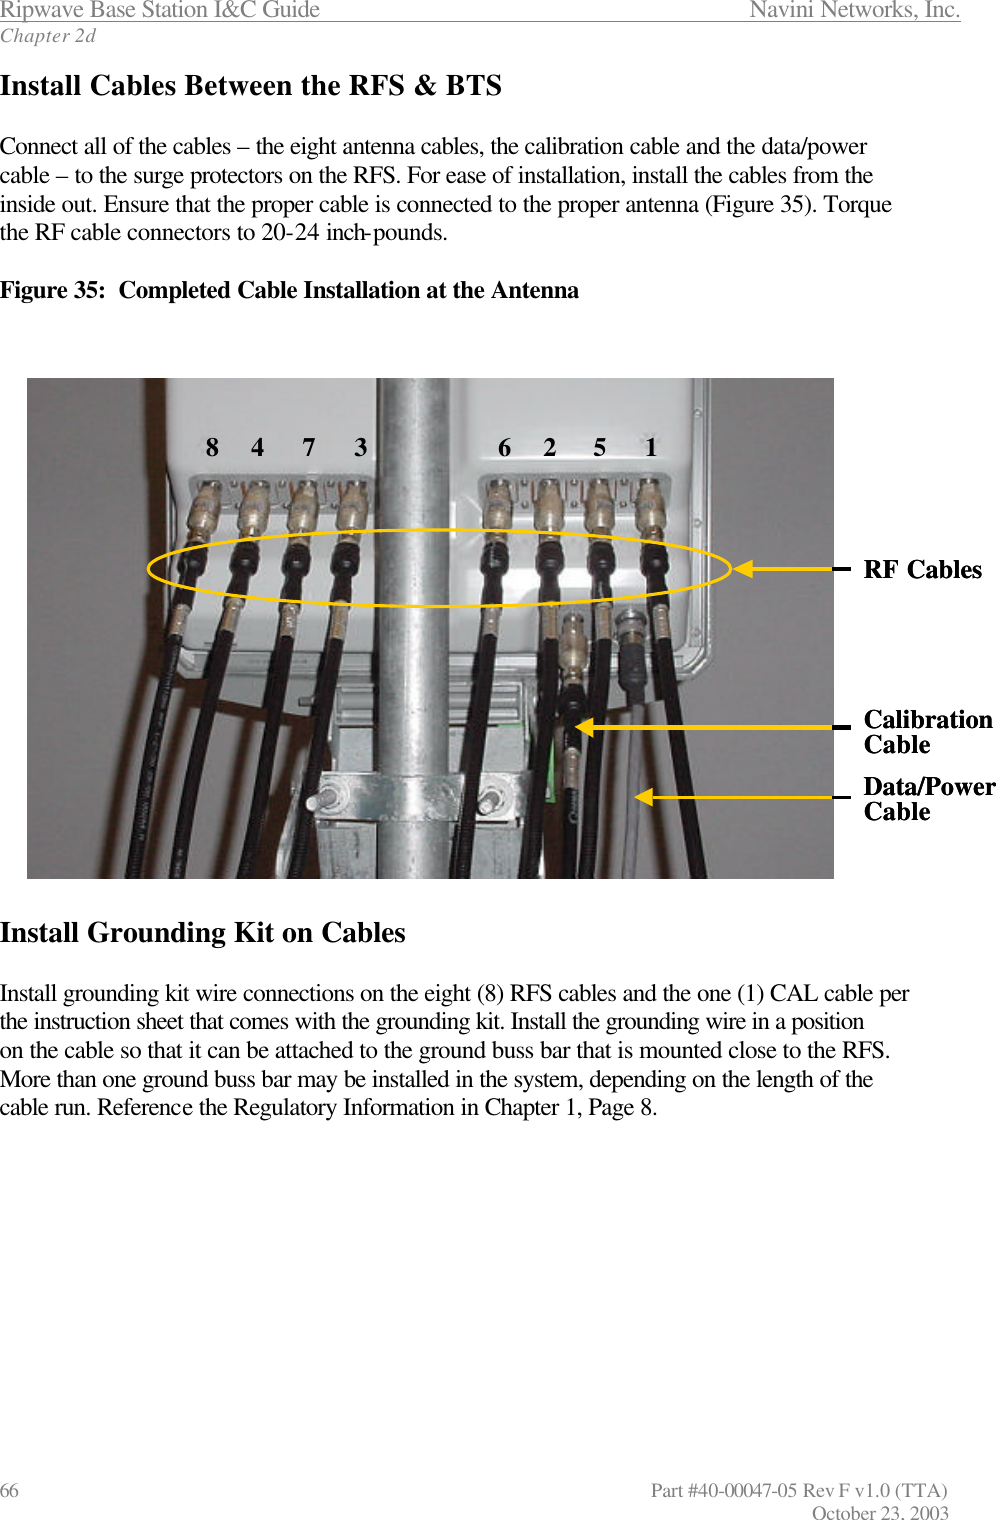 Ripwave Base Station I&amp;C Guide                 Navini Networks, Inc. Chapter 2d 66                   Part #40-00047-05 Rev F v1.0 (TTA)         October 23, 2003 Install Cables Between the RFS &amp; BTS  Connect all of the cables – the eight antenna cables, the calibration cable and the data/power  cable – to the surge protectors on the RFS. For ease of installation, install the cables from the inside out. Ensure that the proper cable is connected to the proper antenna (Figure 35). Torque the RF cable connectors to 20-24 inch-pounds.  Figure 35:  Completed Cable Installation at the Antenna    Install Grounding Kit on Cables  Install grounding kit wire connections on the eight (8) RFS cables and the one (1) CAL cable per the instruction sheet that comes with the grounding kit. Install the grounding wire in a position on the cable so that it can be attached to the ground buss bar that is mounted close to the RFS. More than one ground buss bar may be installed in the system, depending on the length of the cable run. Reference the Regulatory Information in Chapter 1, Page 8. 6 2 5 18 4 7 3CalibrationCableData/PowerCableRF Cables6 2 5 18 4 7 3CalibrationCableData/PowerCableRF Cables